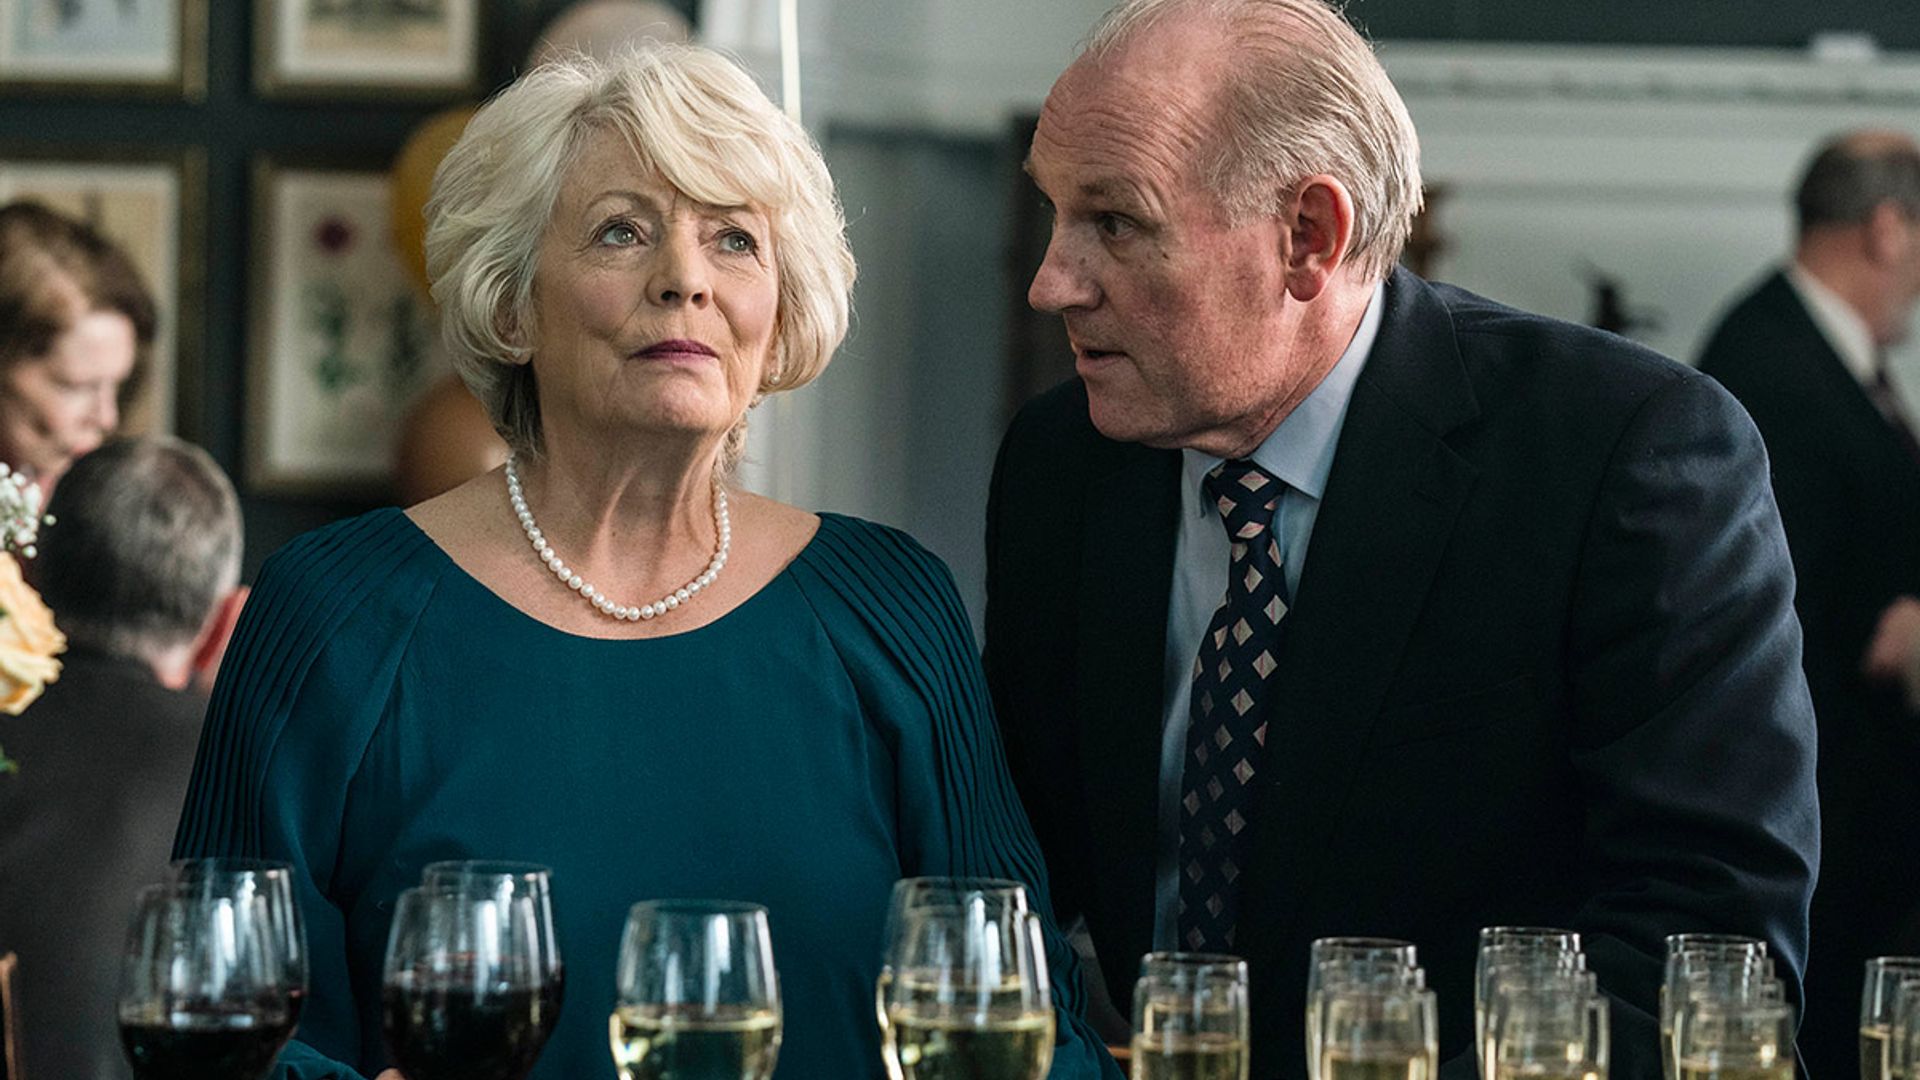 Alison Steadman opens up about filming difficult scenes for BBC's Life